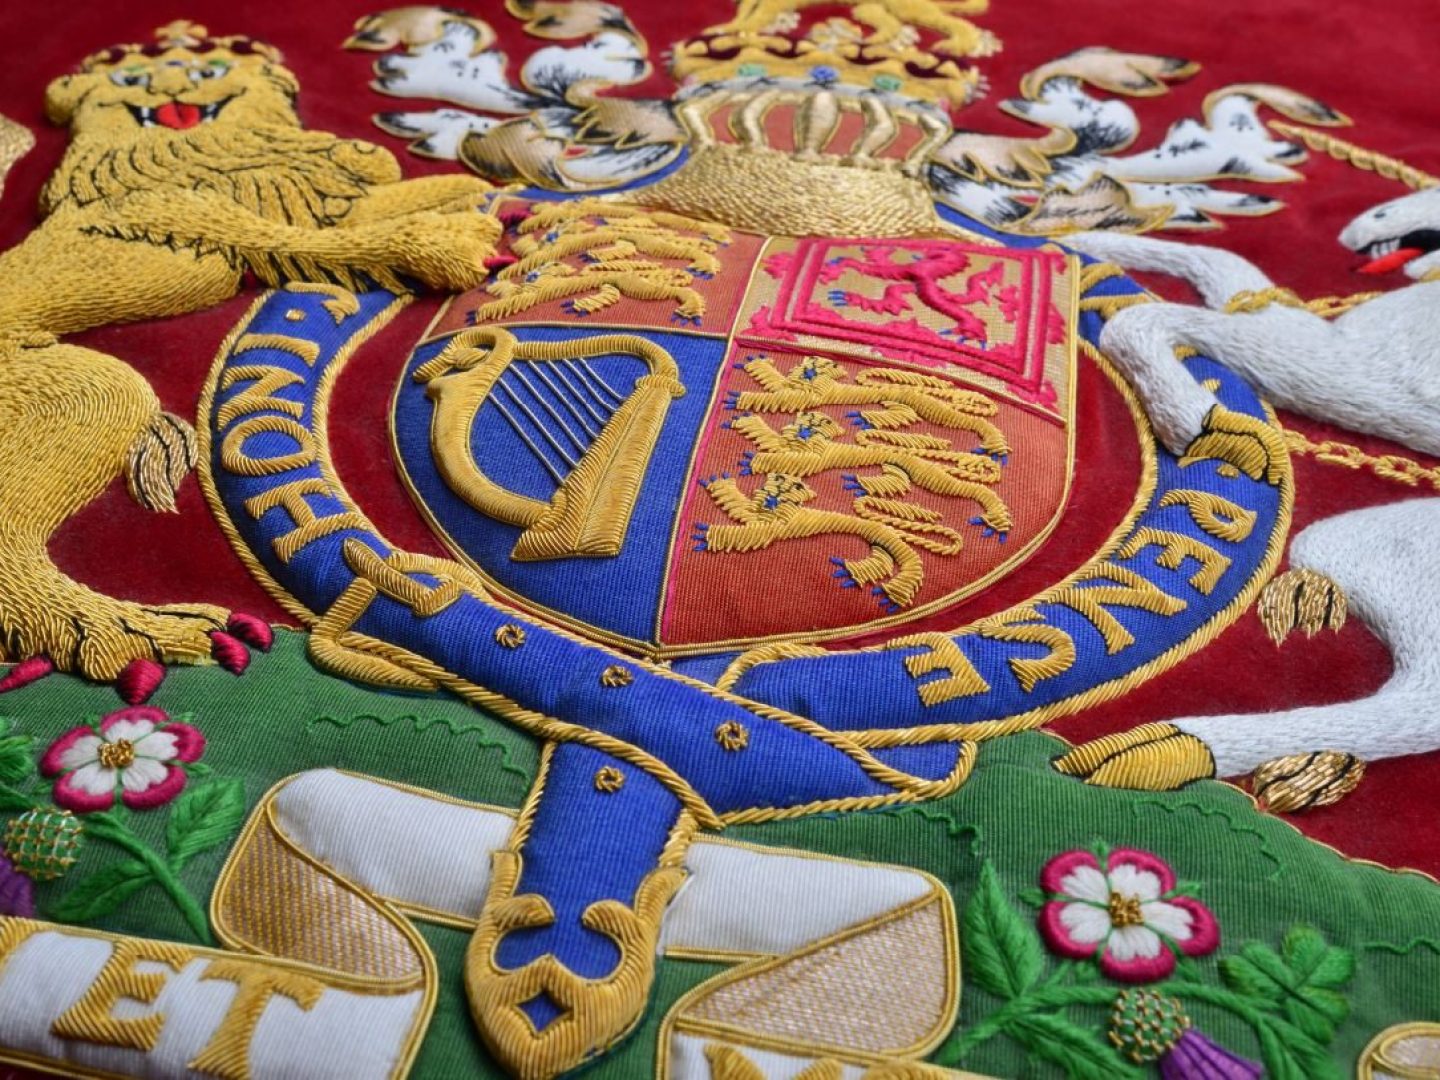 A brief guide to Heraldry